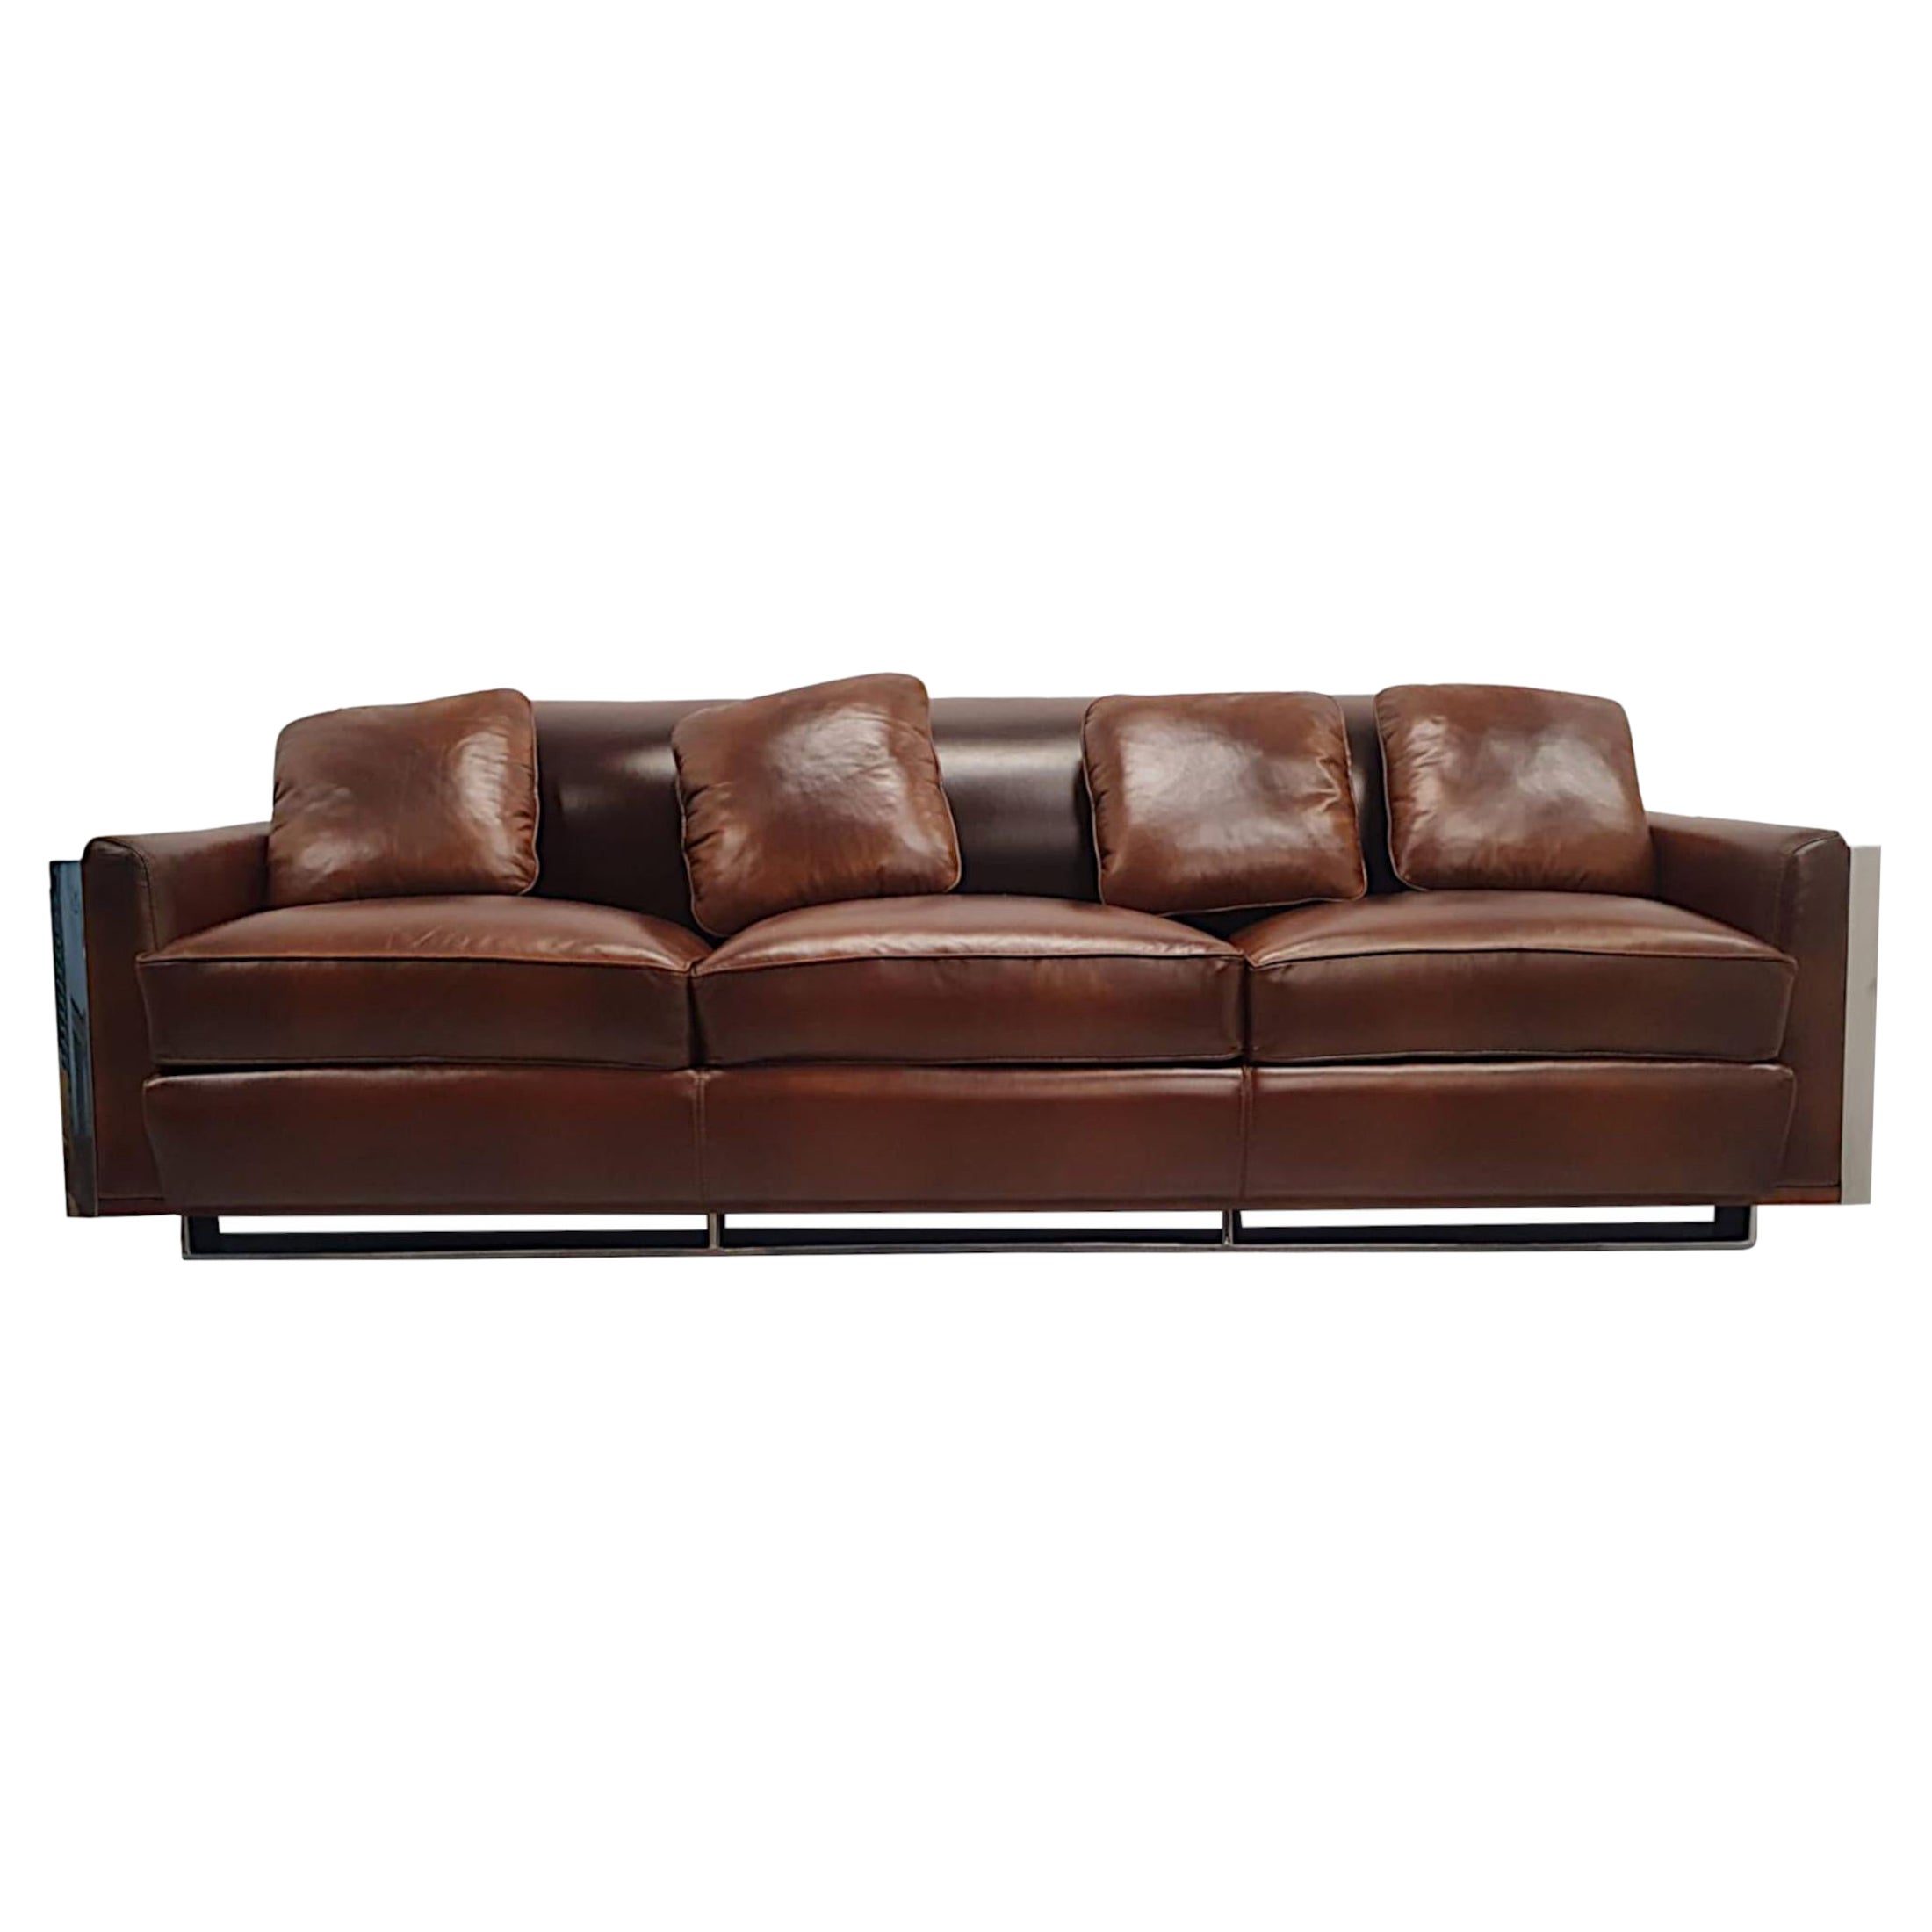 A Fabulous Leather and Chrome Sofa in the Art Deco Style For Sale